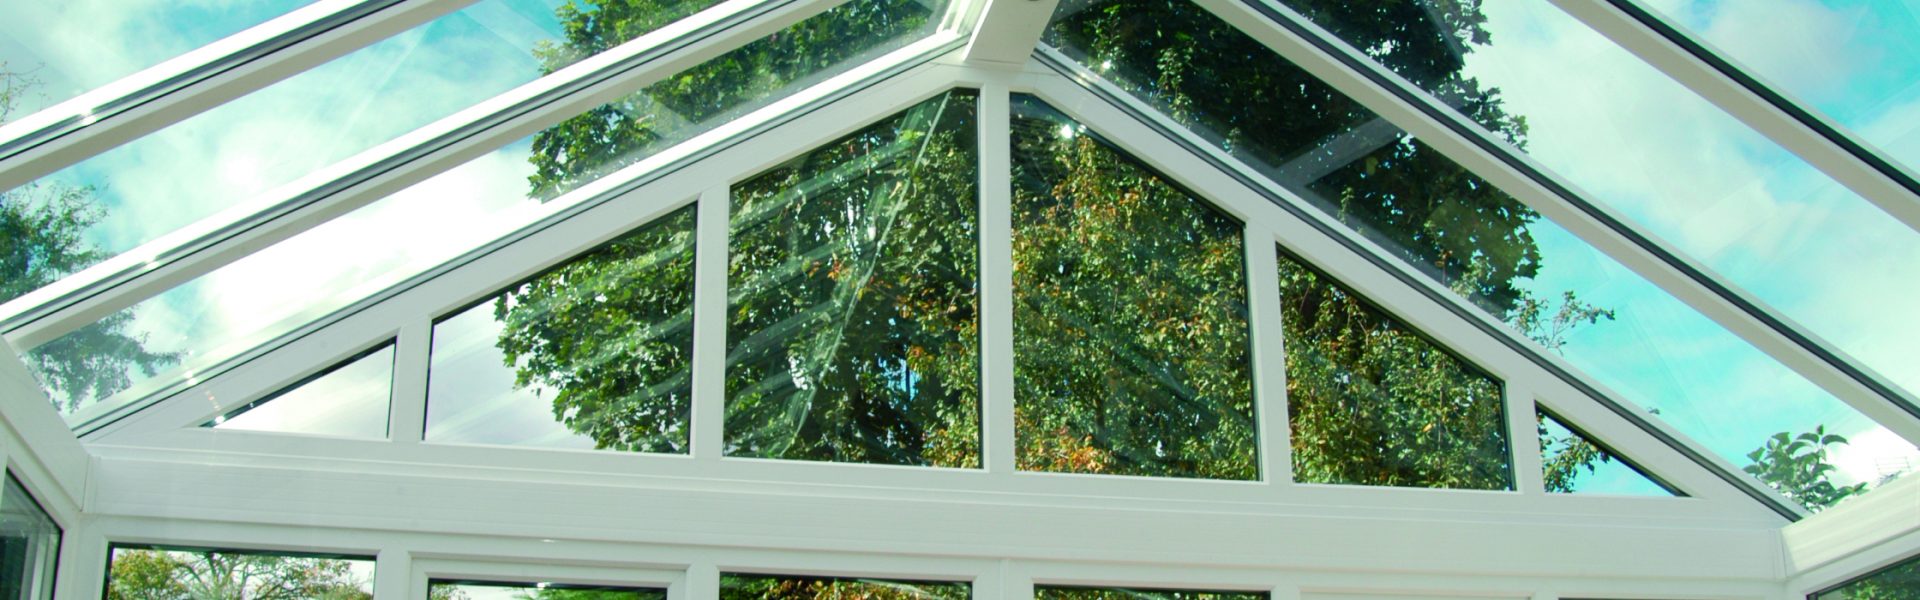 Conservatory Roofs Installers Near Bishopsgate Green